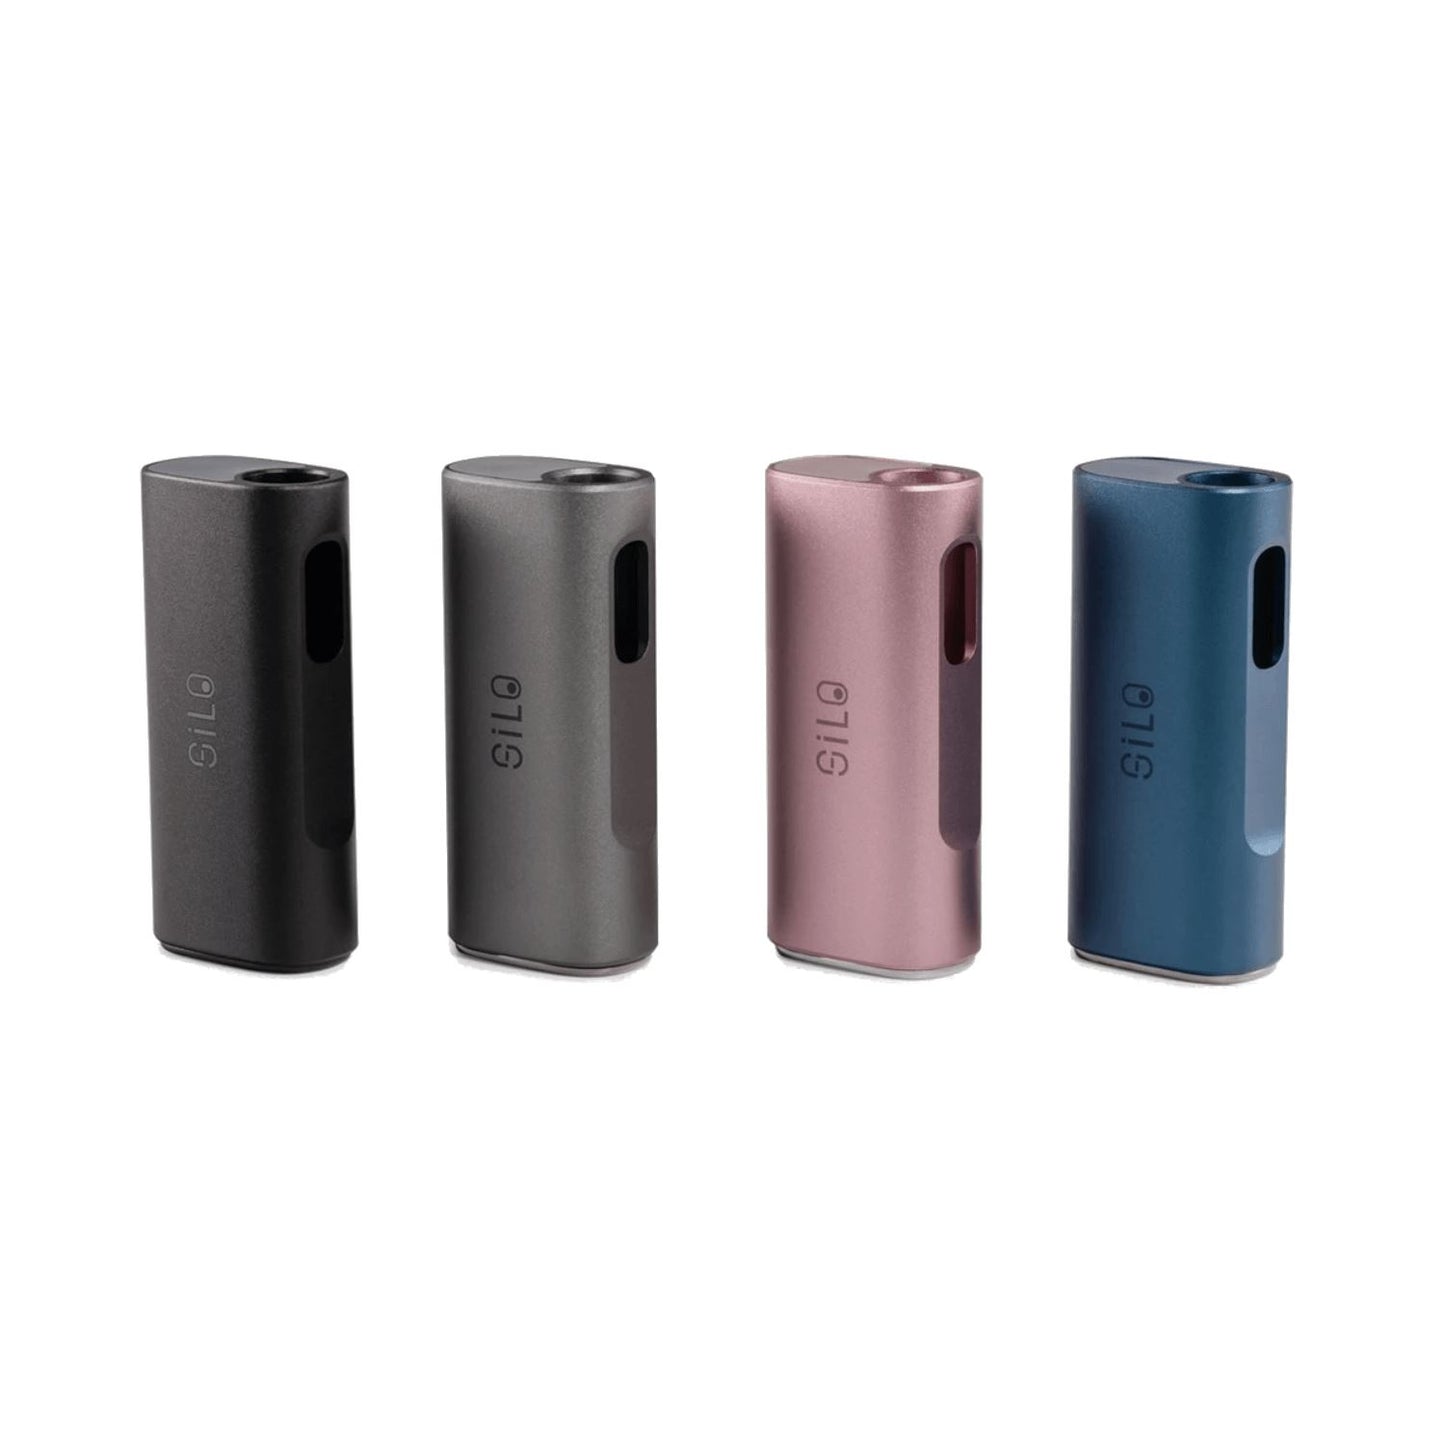 CCELL Silo Auto Draw Cartridge Vaporizer 500mAh Flower Power Packages 